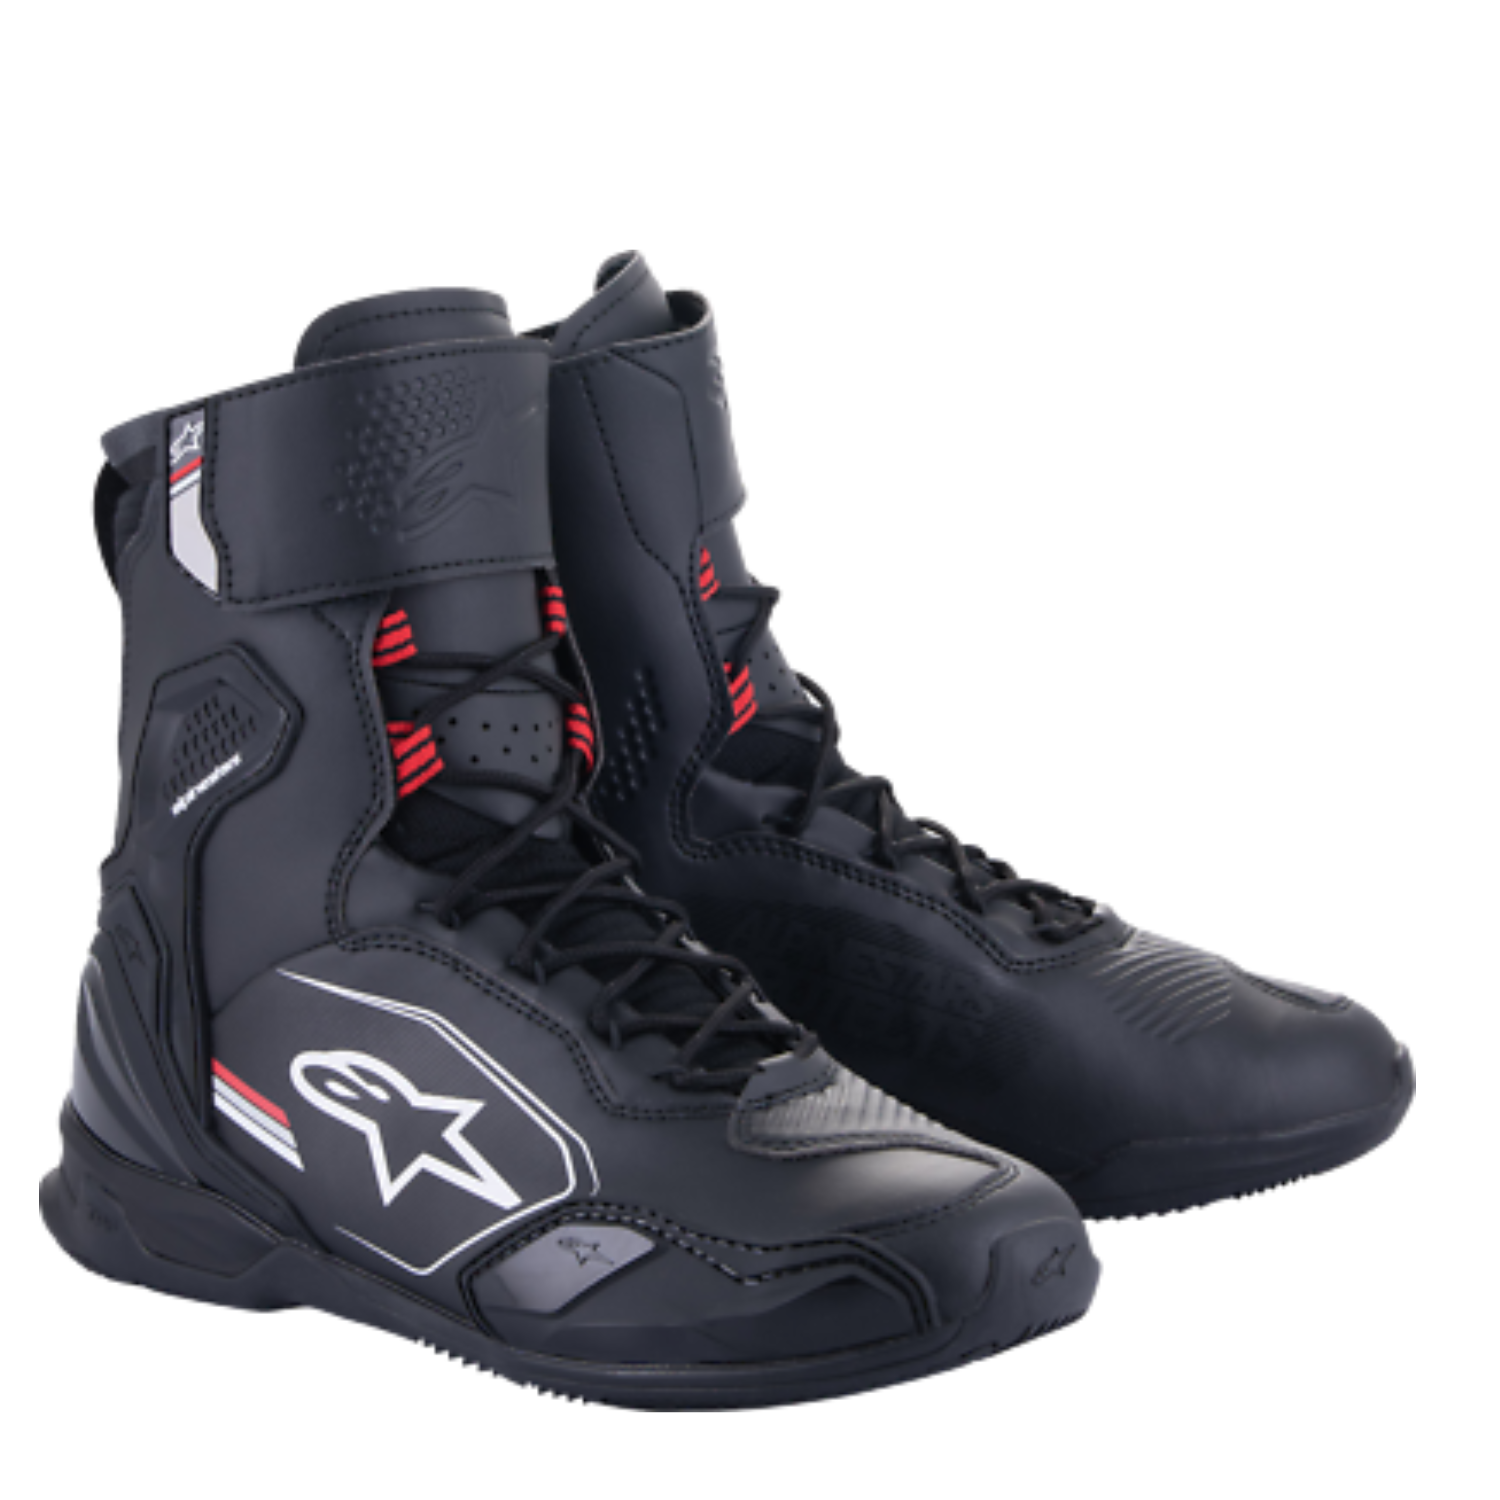 Image of Alpinestars Superfaster Shoes Black Gray Bright Red Taille US 11